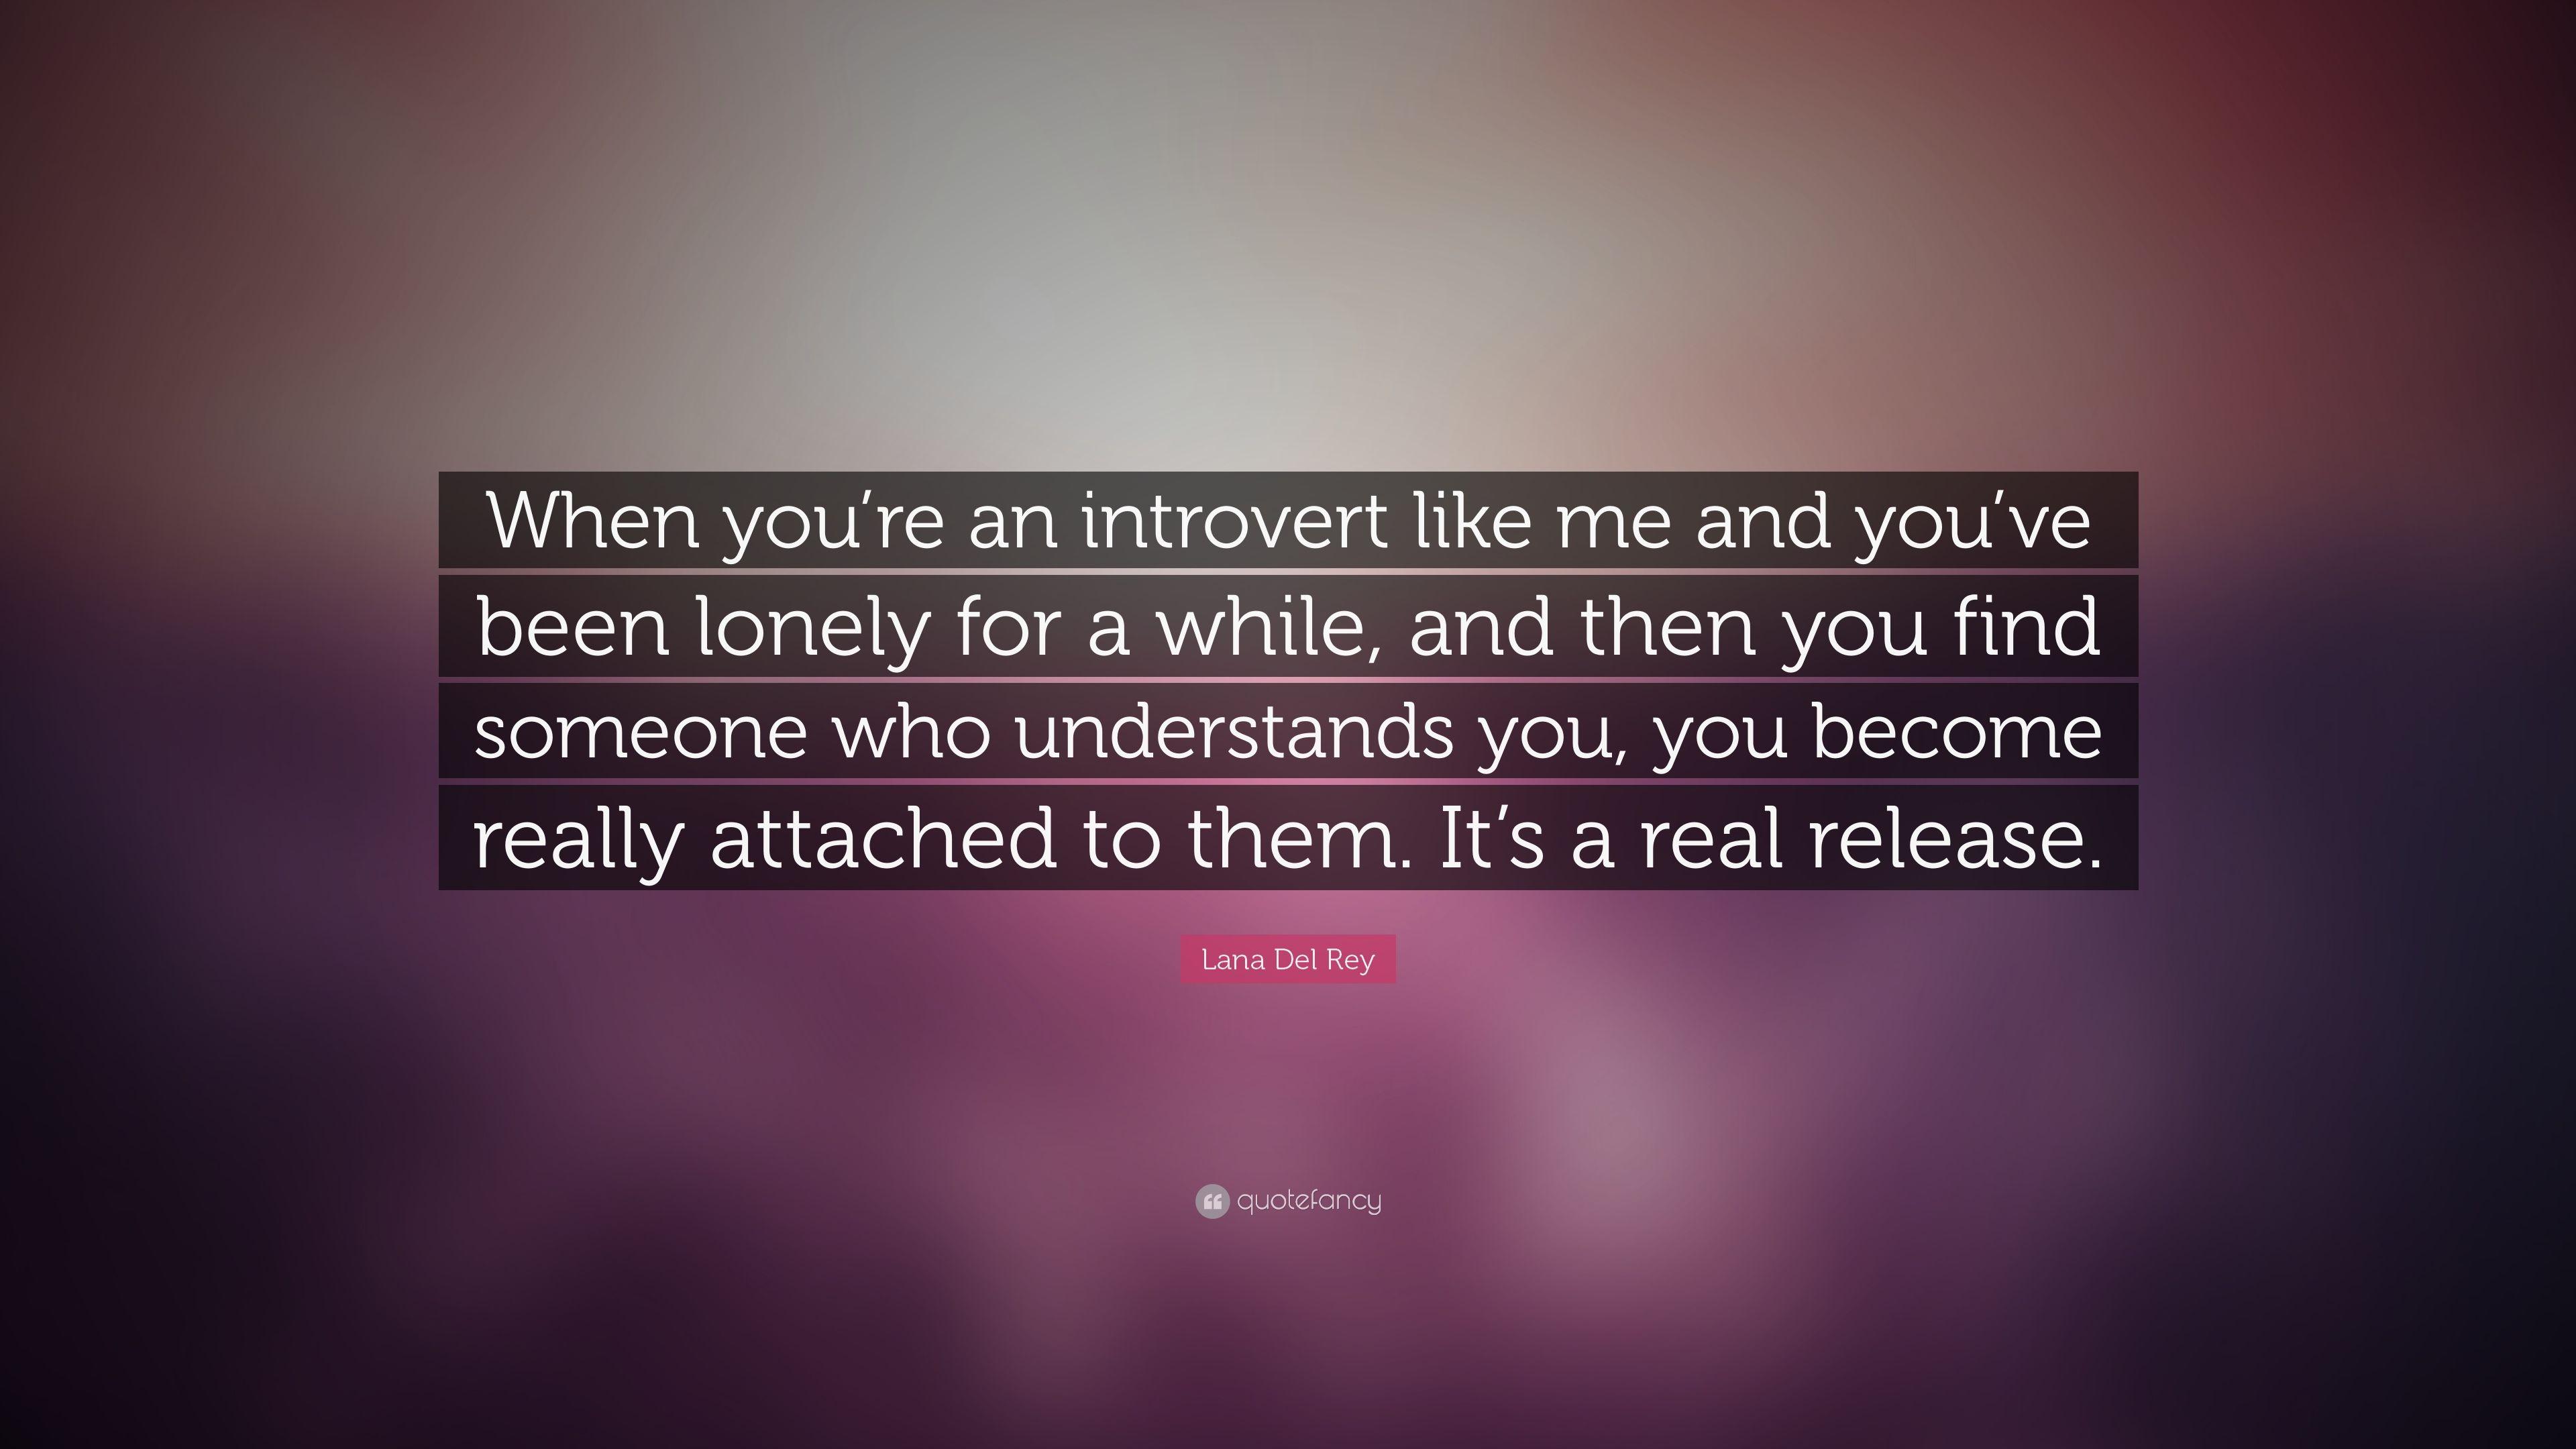 Lana Del Rey Quote: “When you're an introvert like me and you've